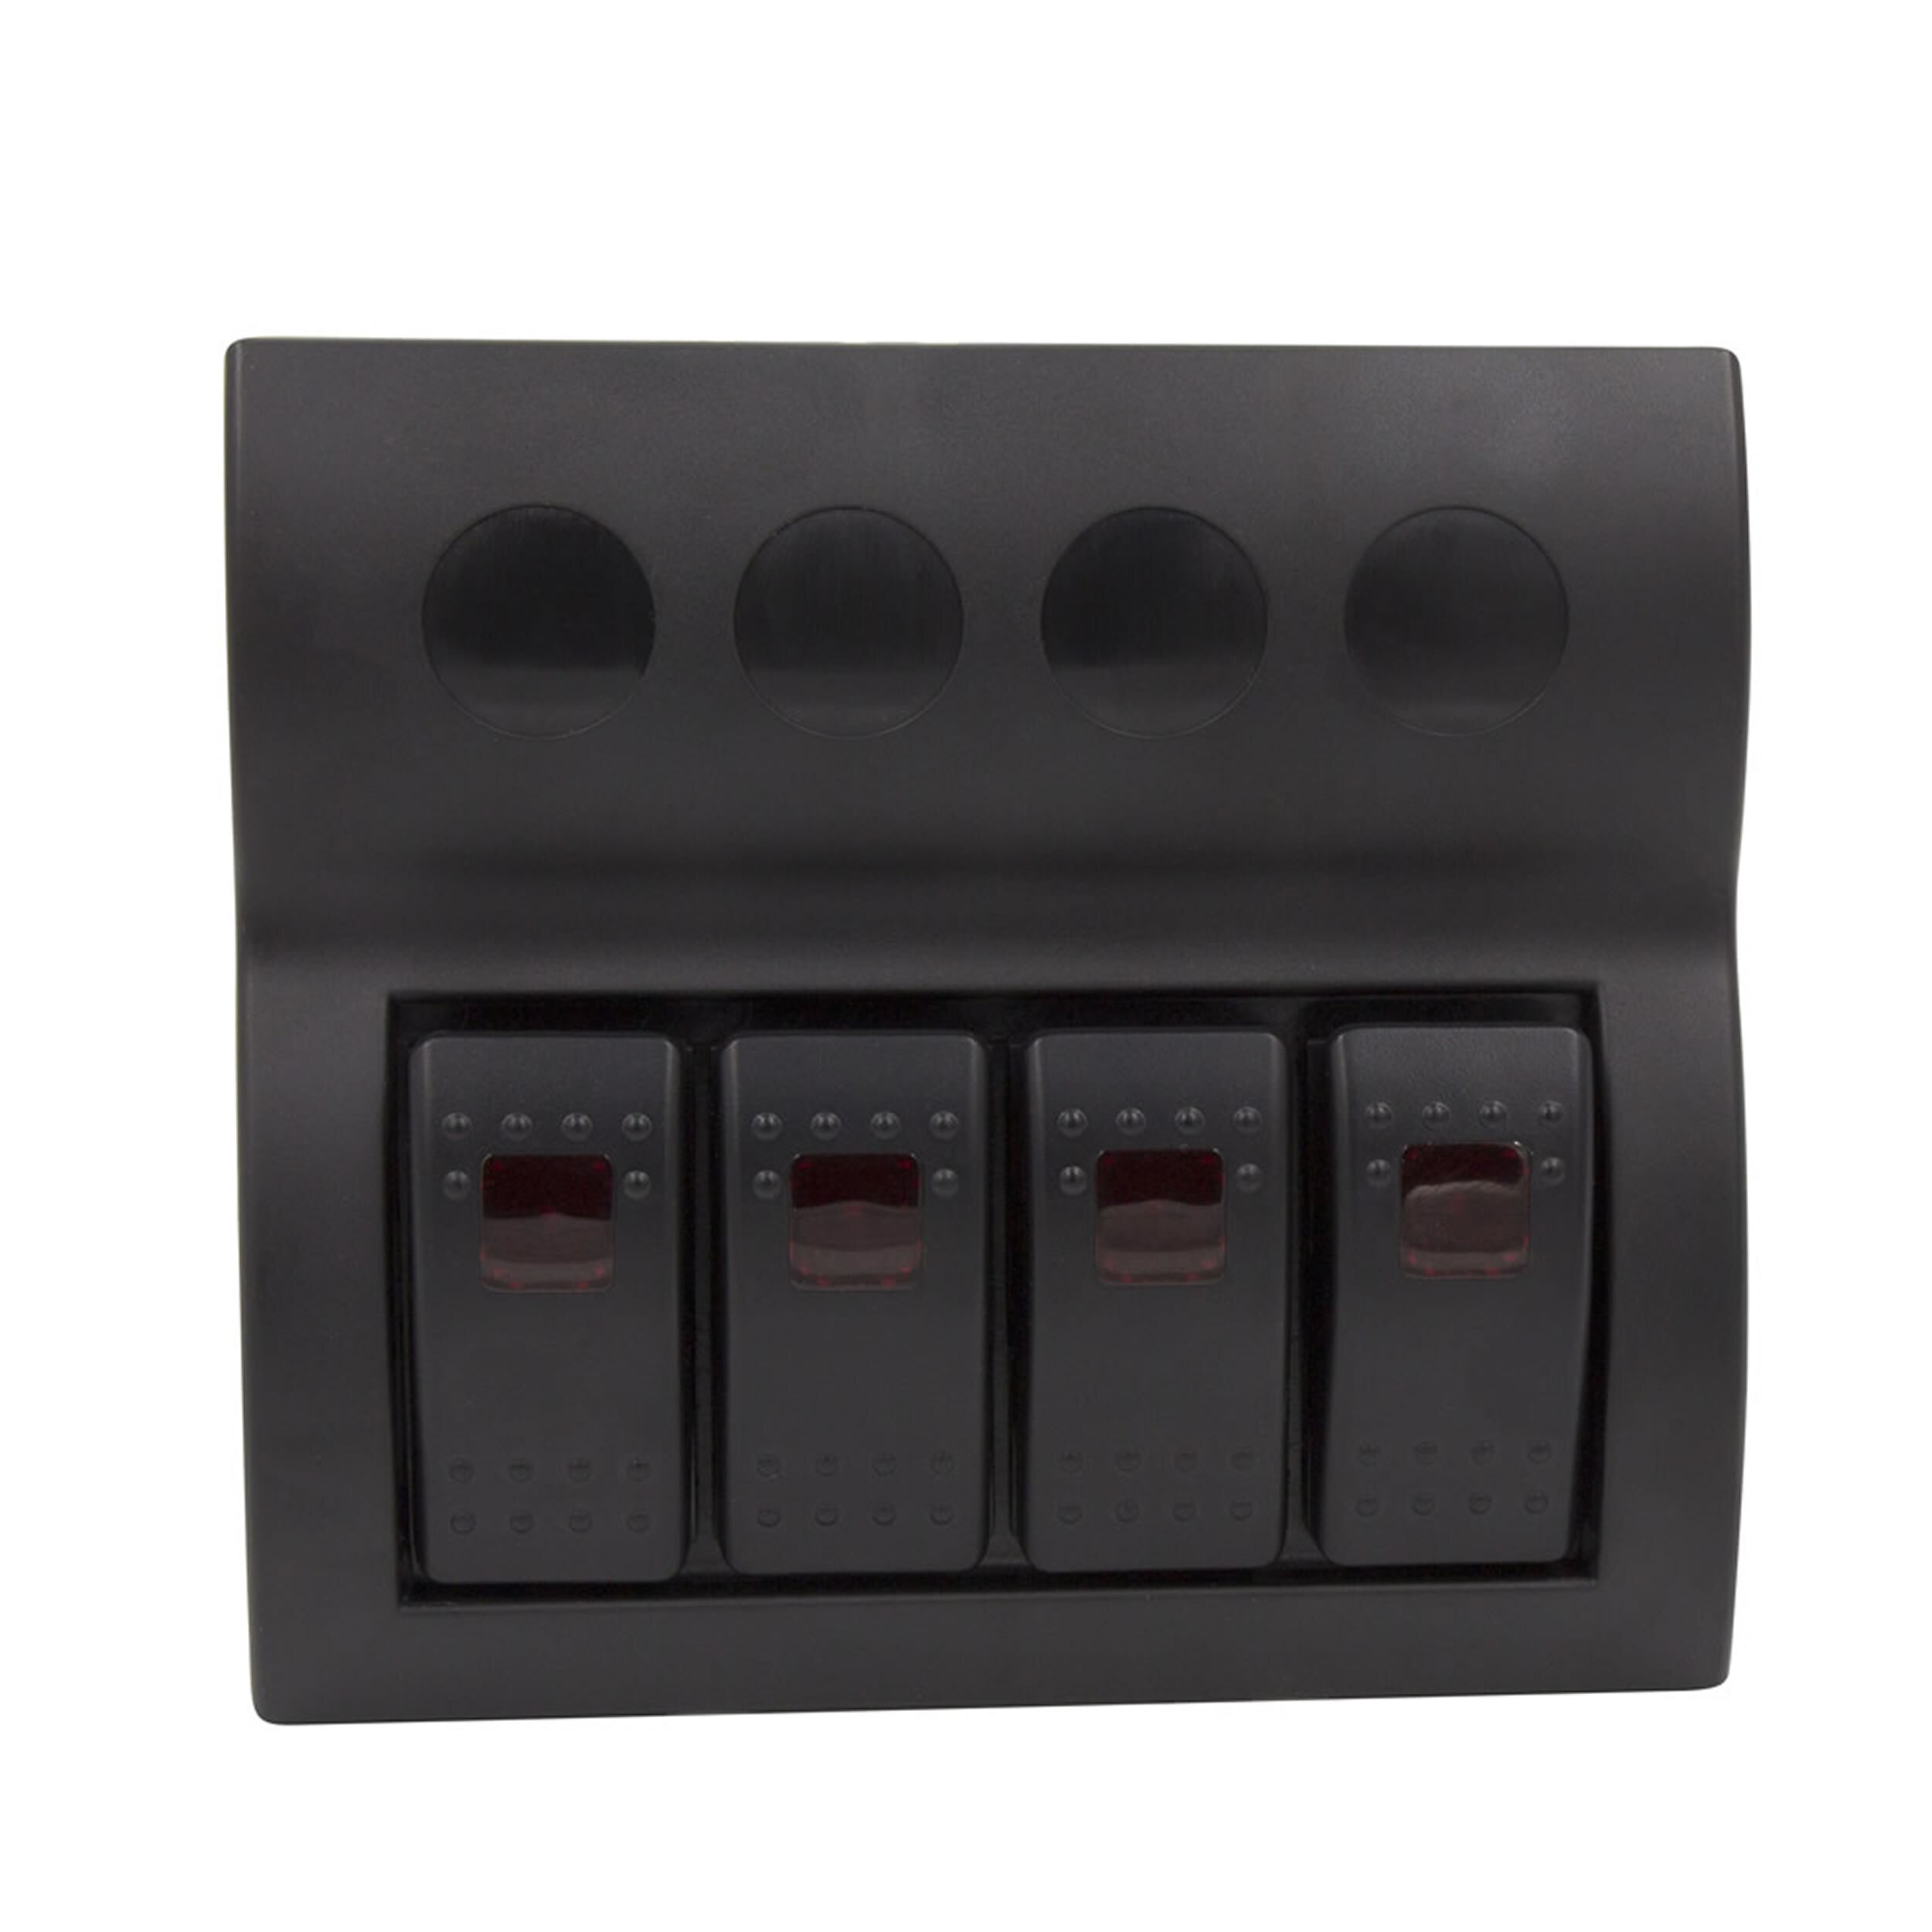 Panel Switches - 4 Switch Panel - Each